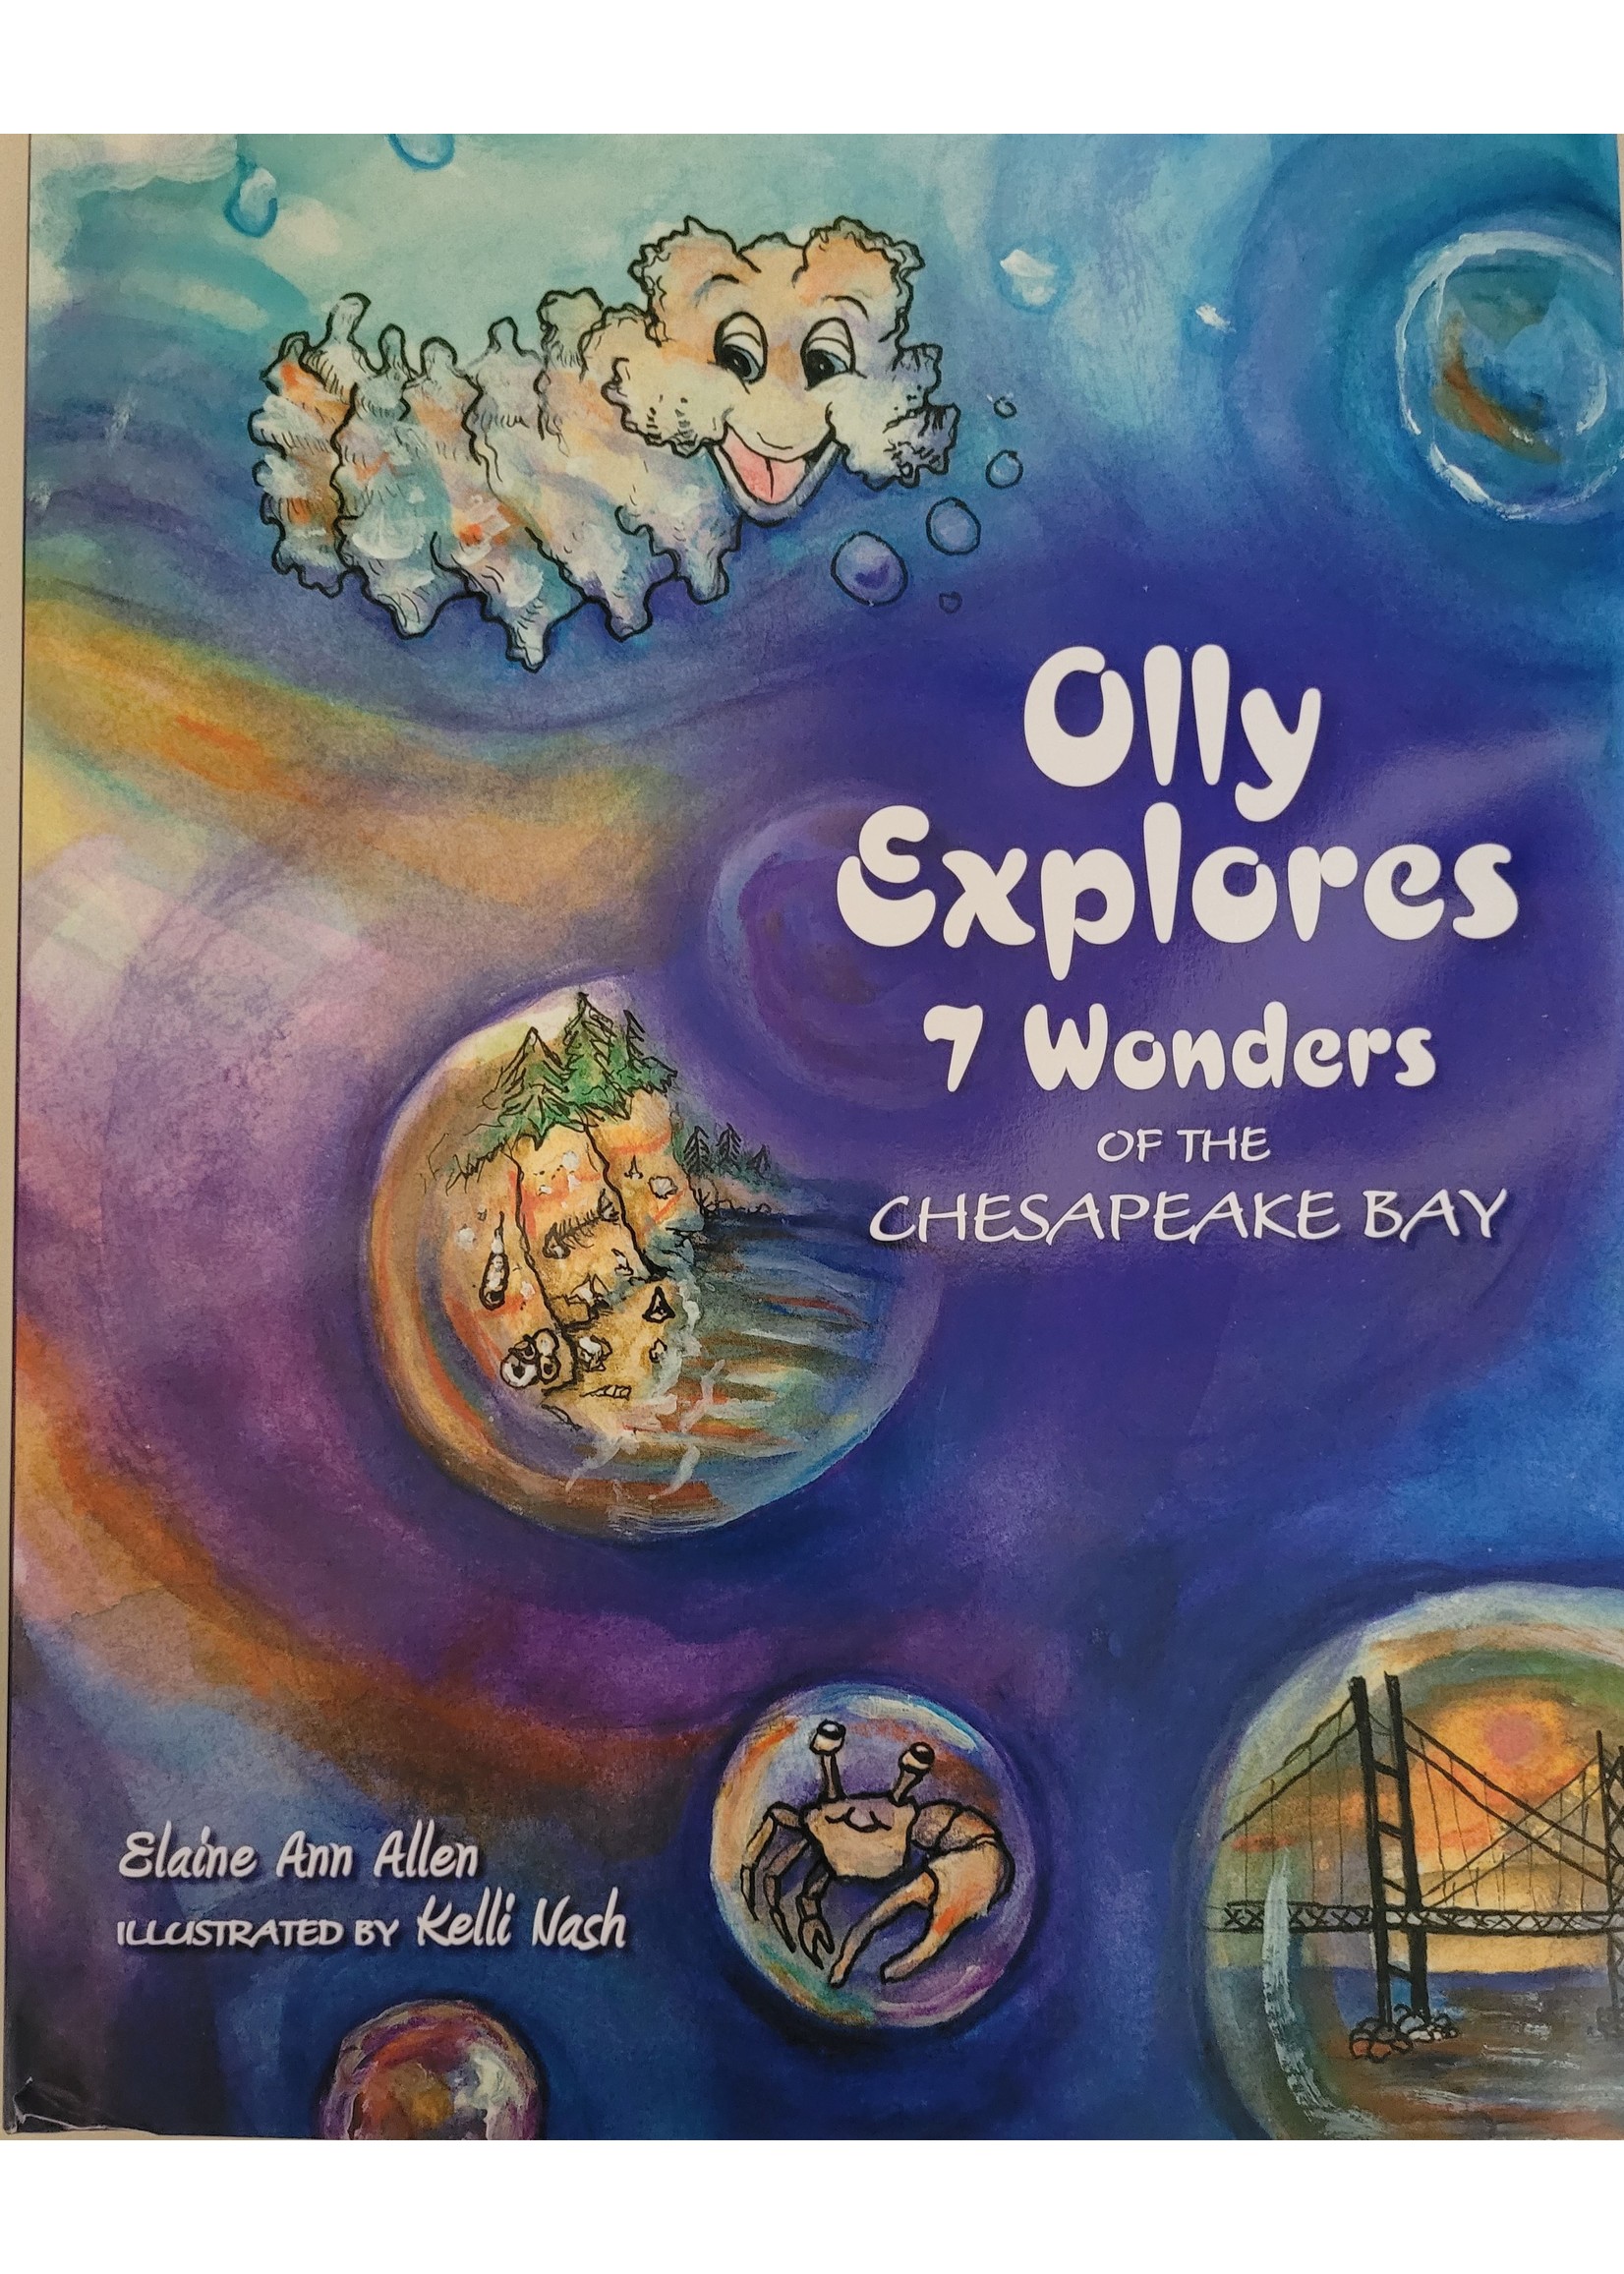 Olly Explores 7 Wonders of the Chesapeake Bay